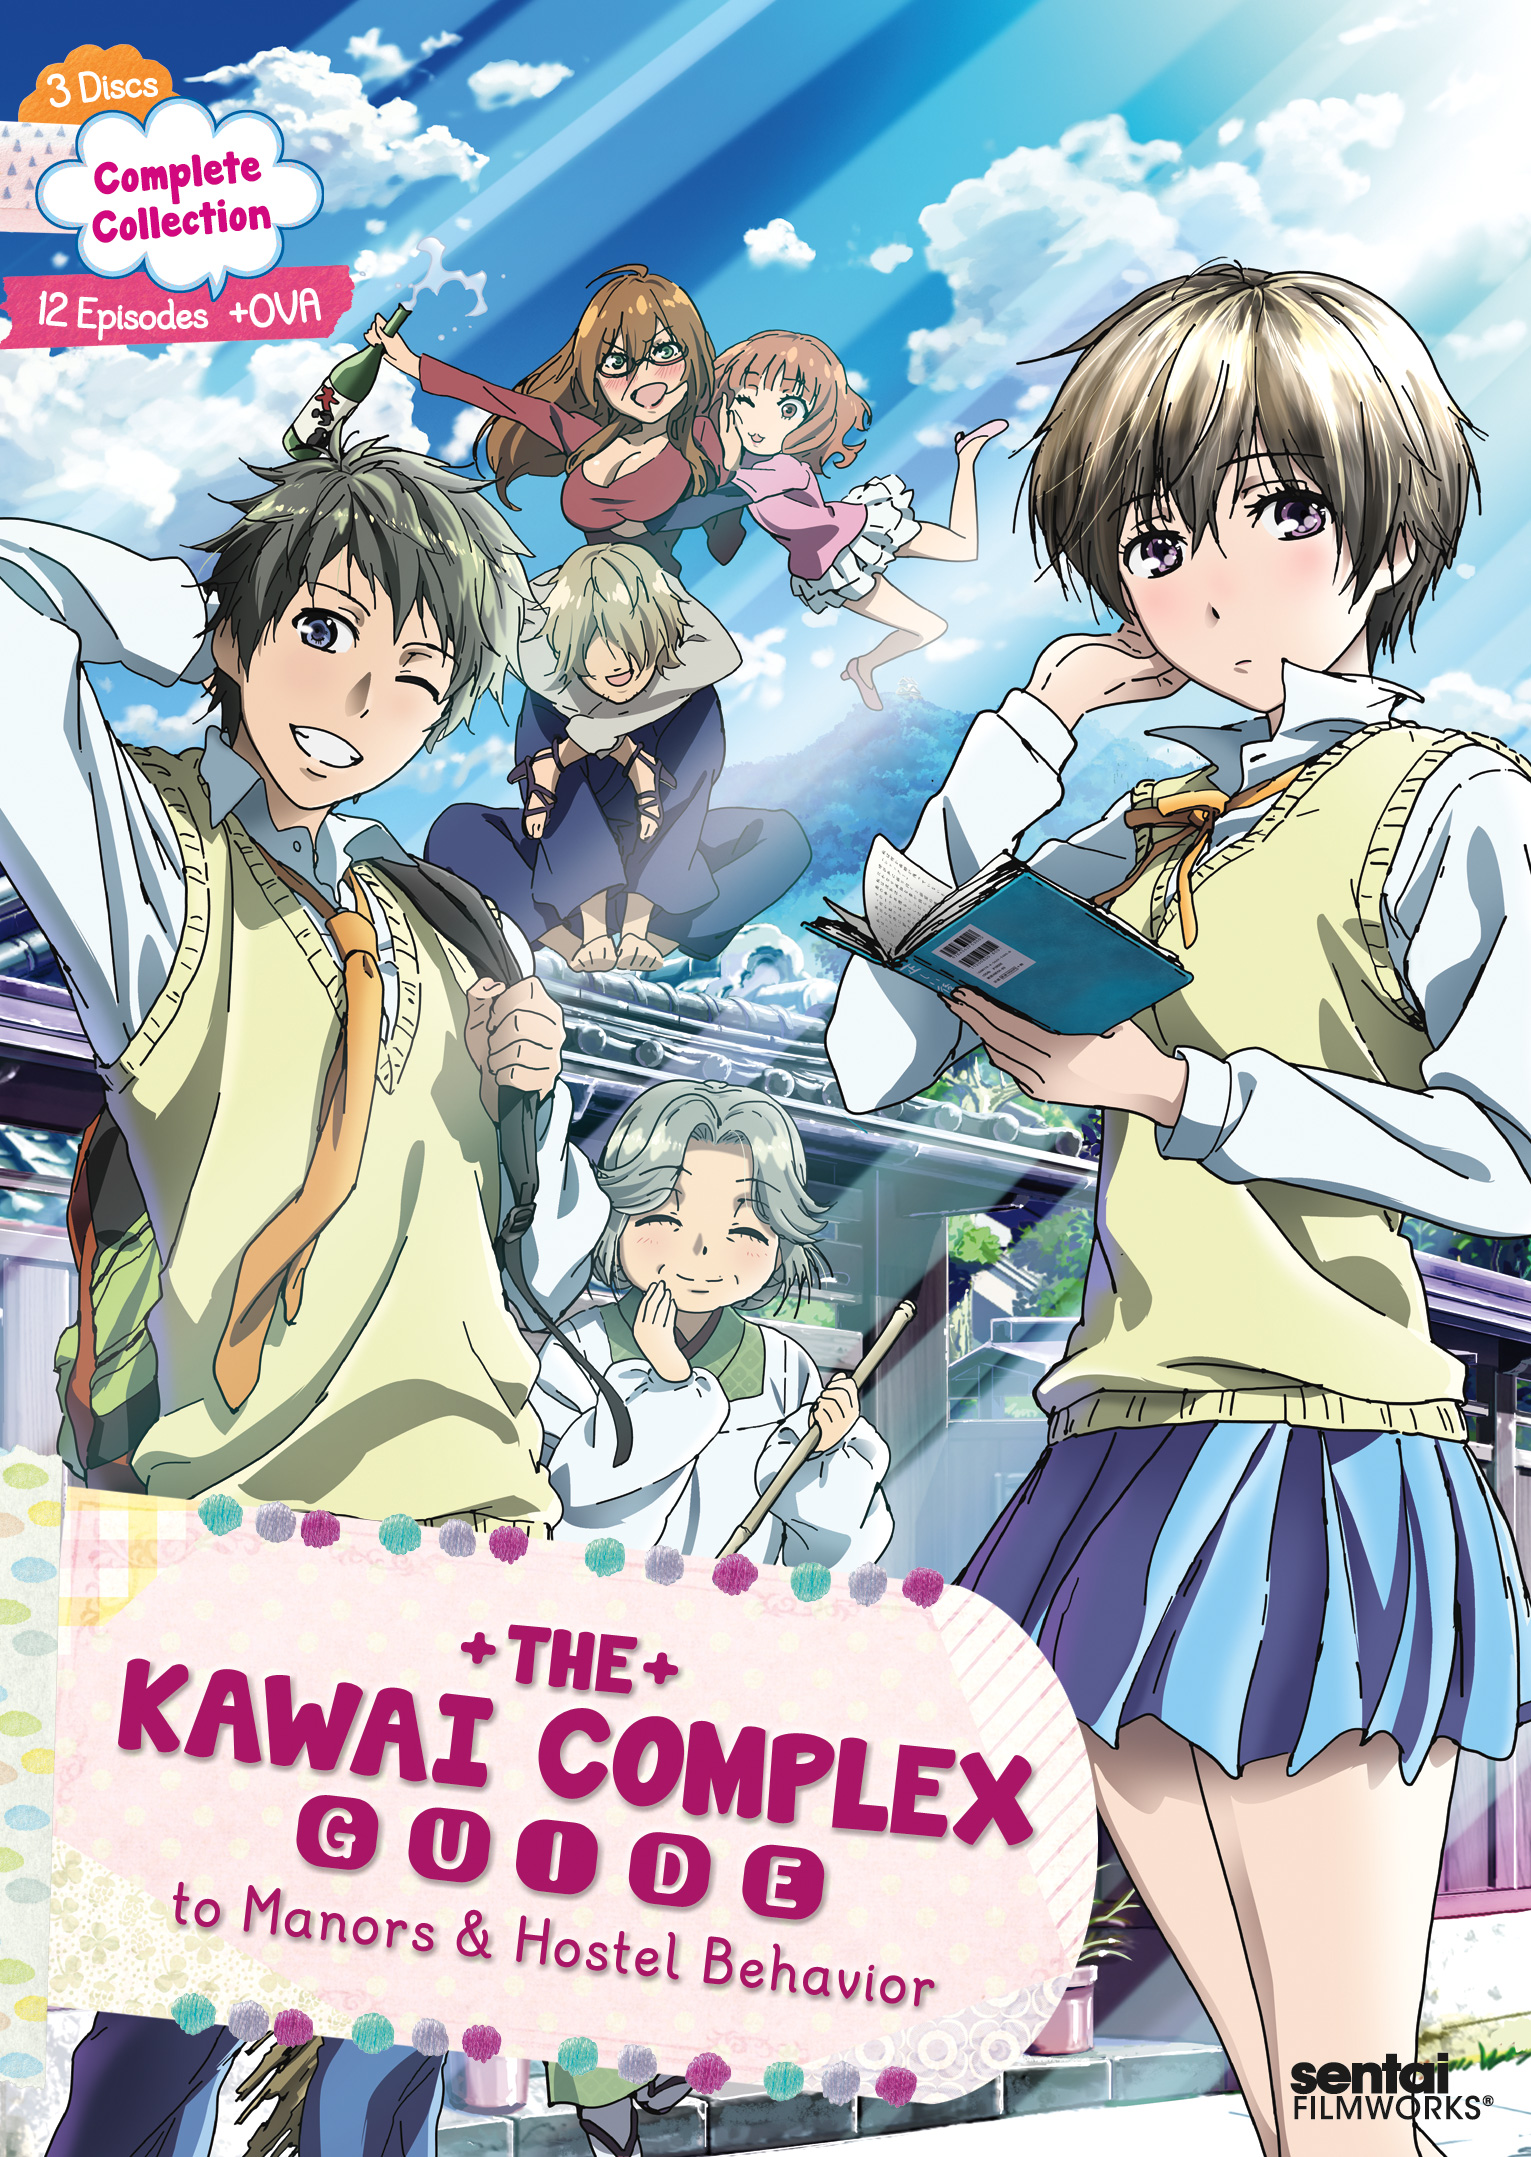 The Kawai Complex Guide to Manors & Hostel Behavior: Complete Collection [Blu-ray] [2 Discs]